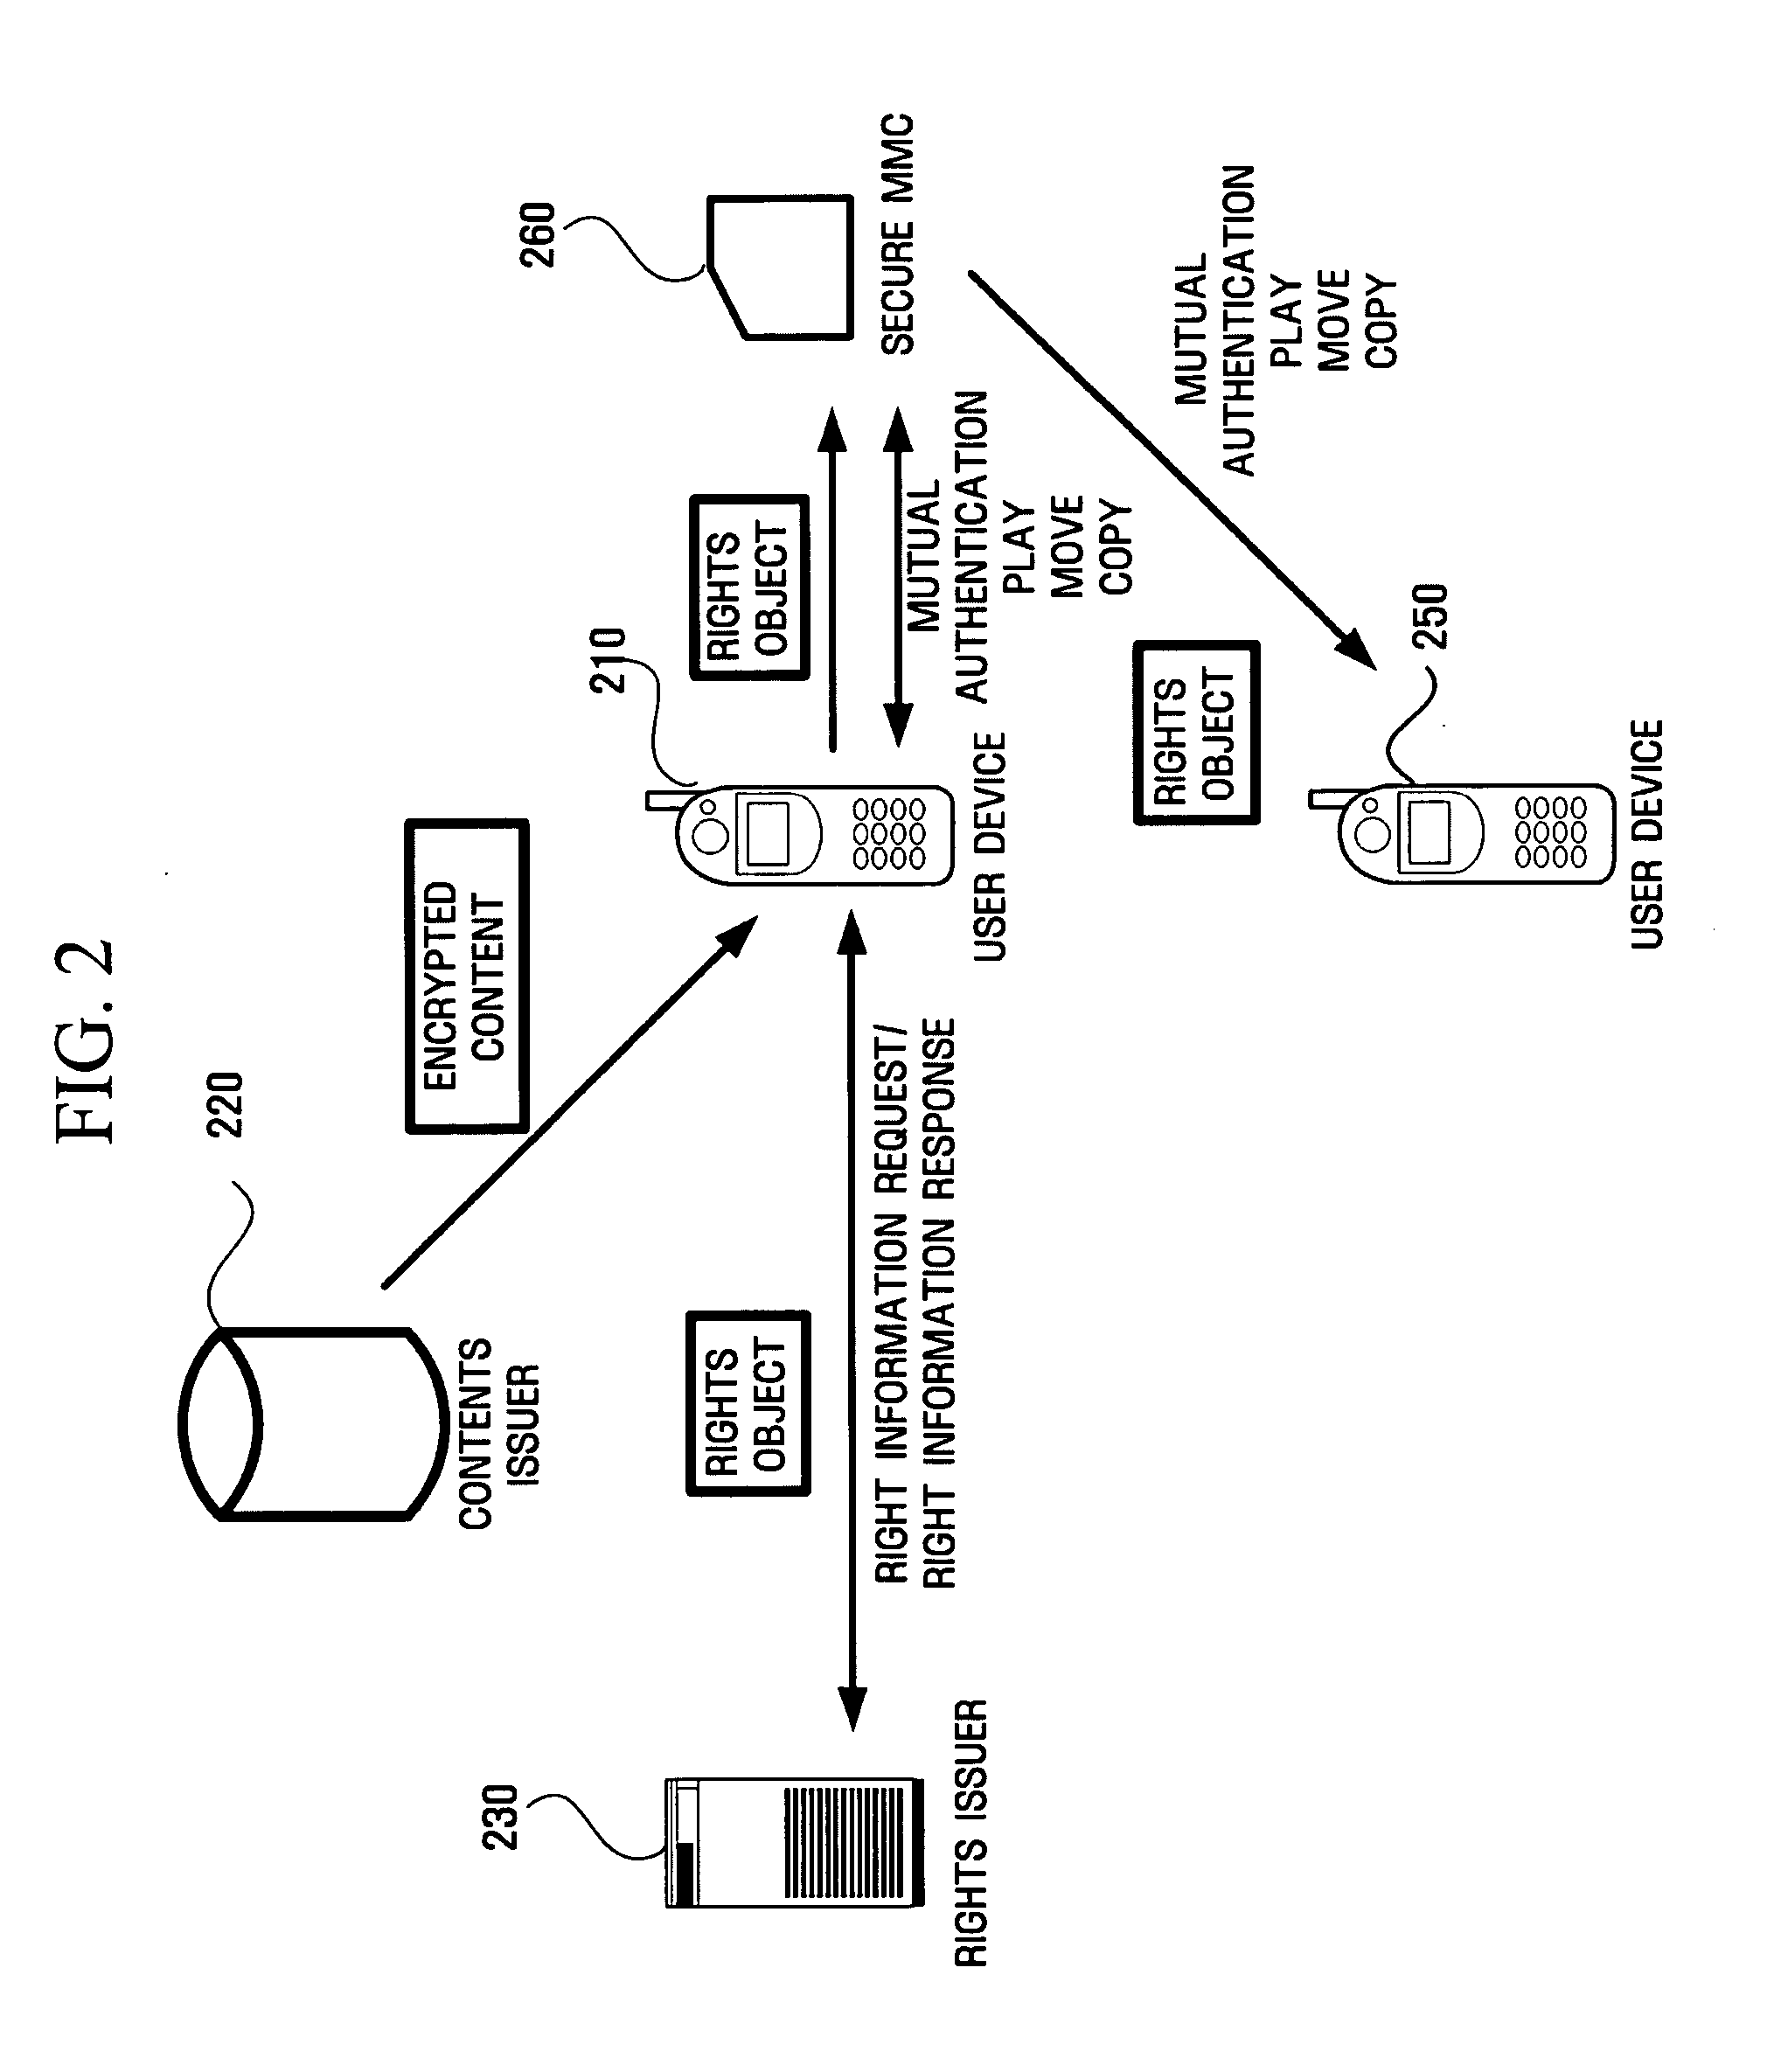 Apparatus and method for moving and copying rights objects between device and portable storage device